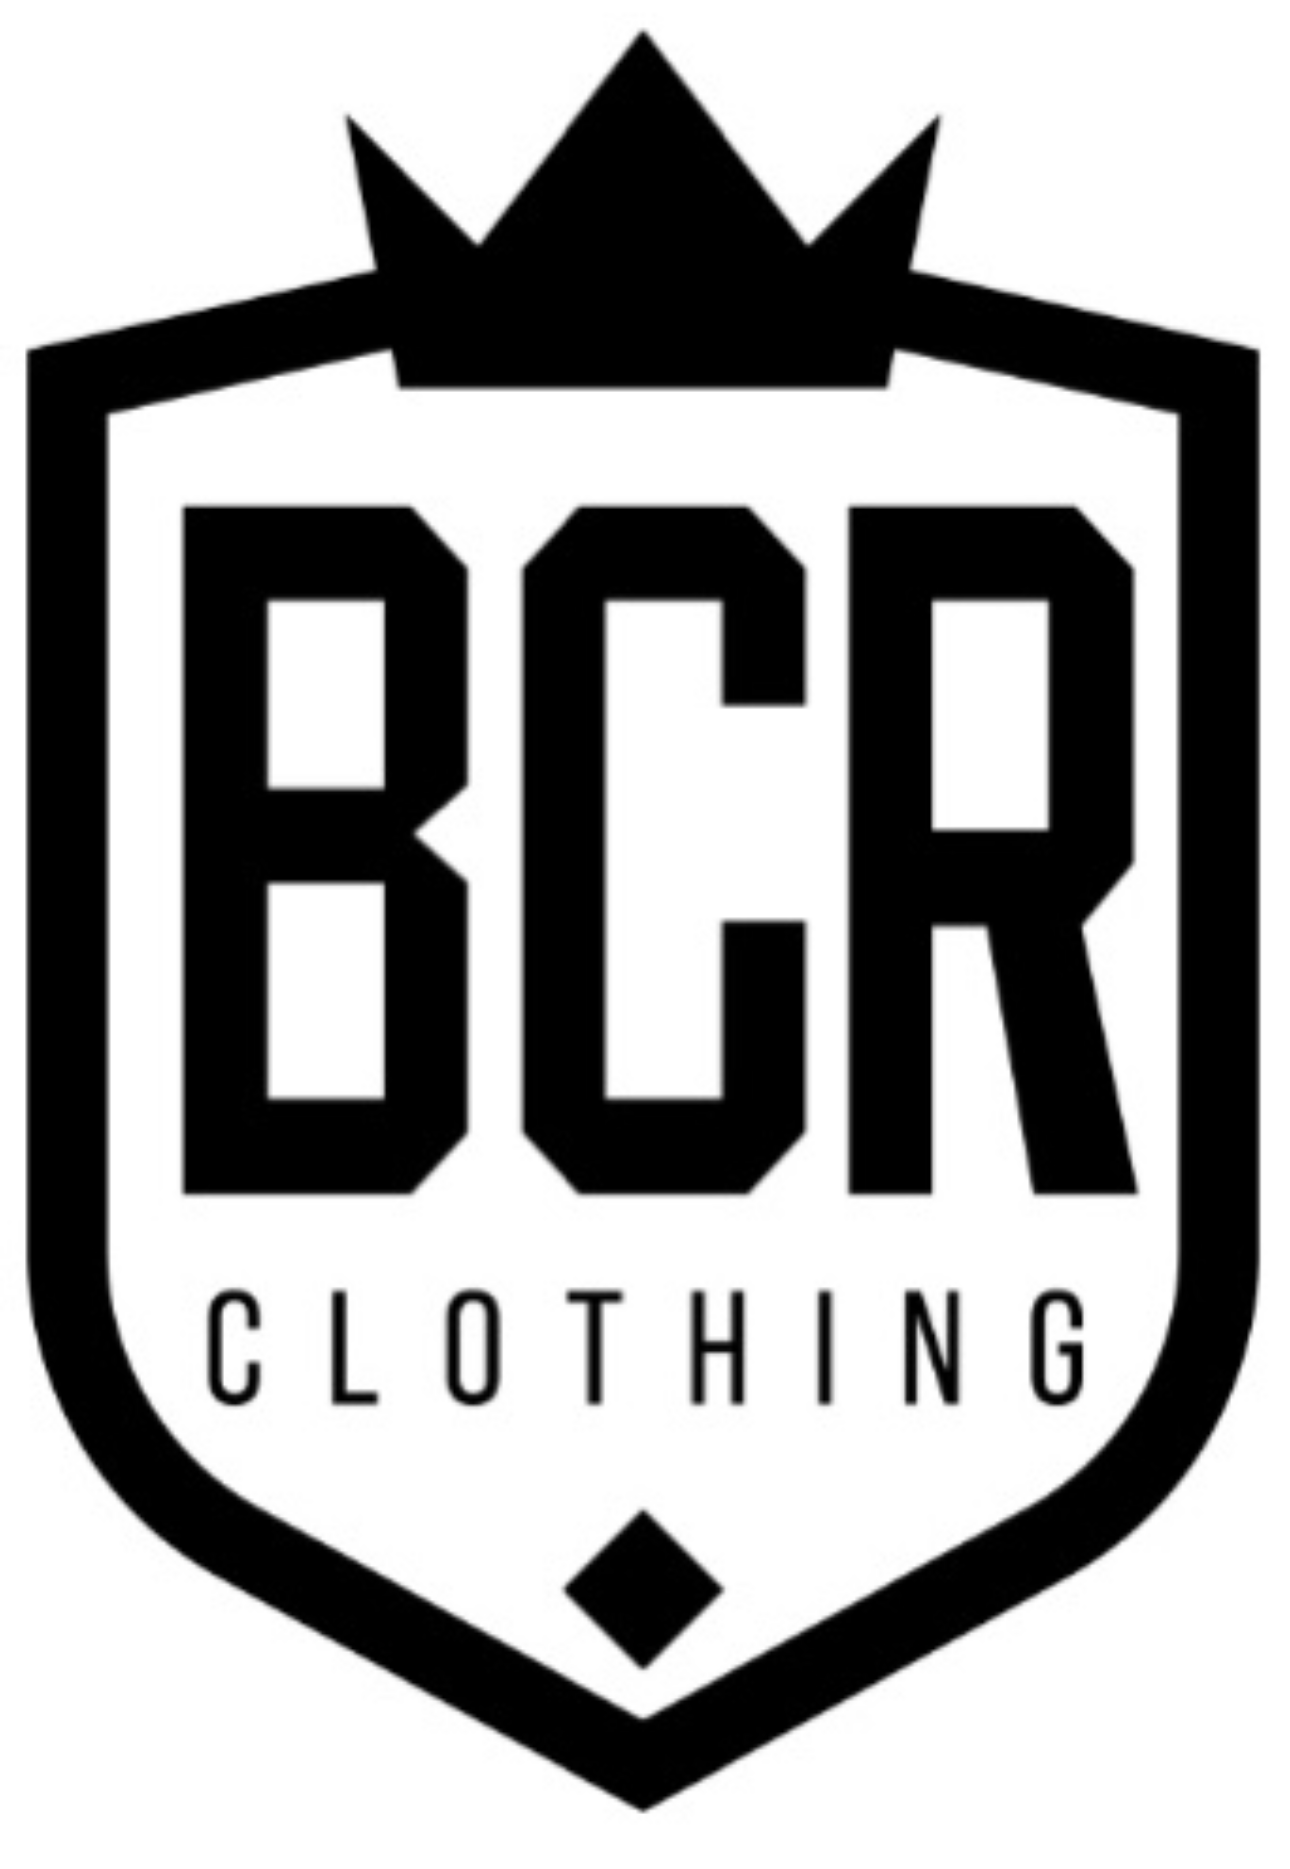 WELCOME TO BCR SHOPS